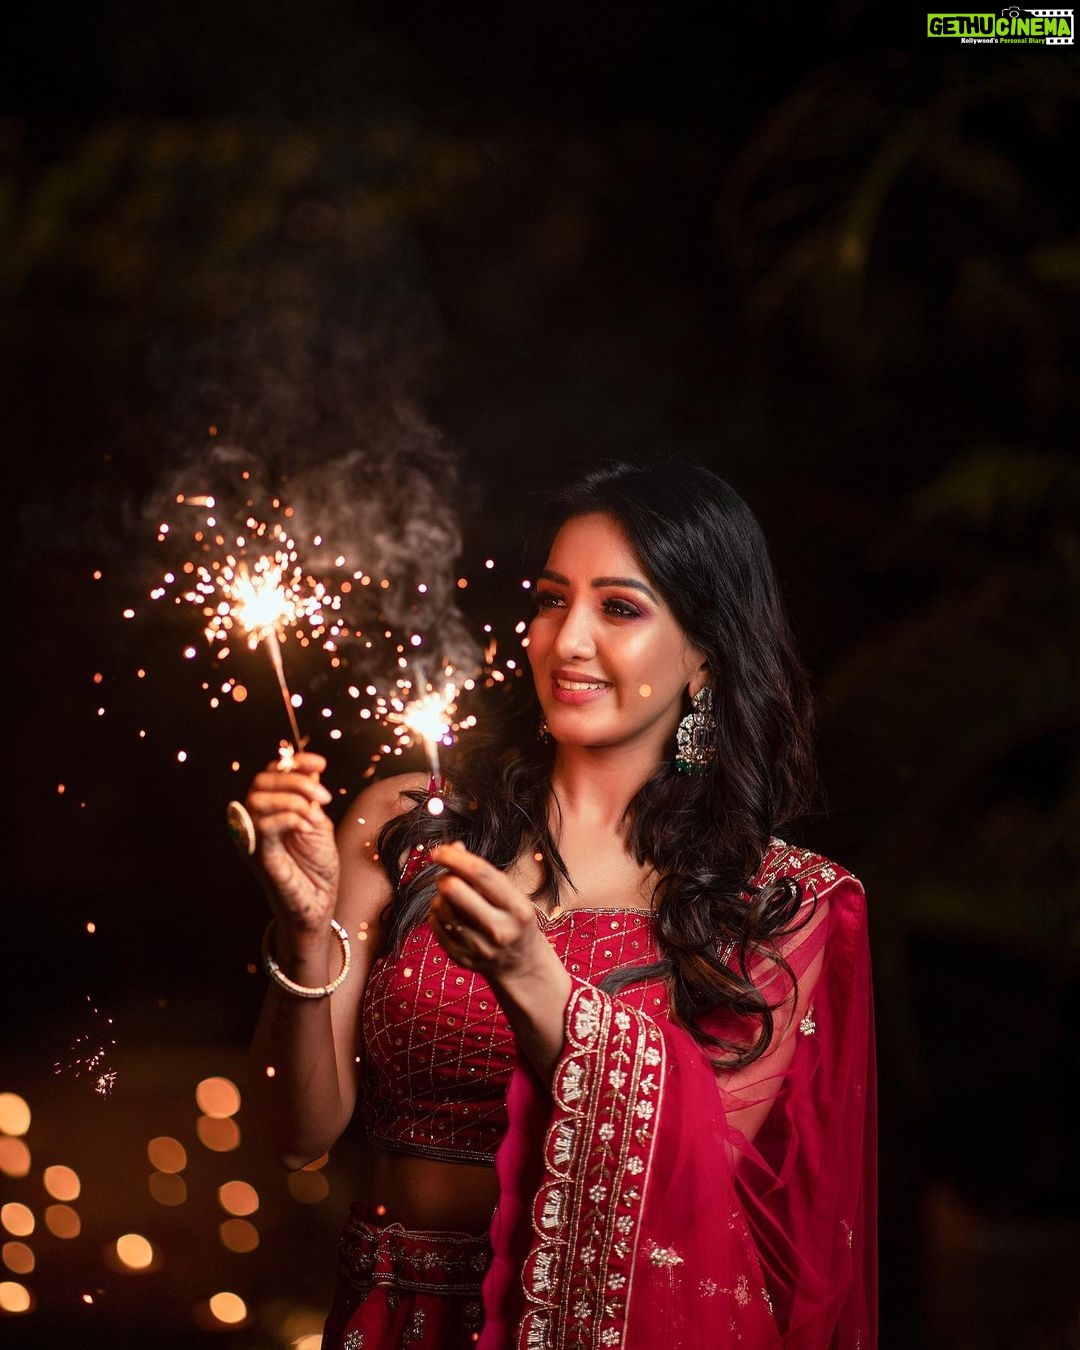 Indian Light Festival: Over 53,337 Royalty-Free Licensable Stock Photos |  Shutterstock